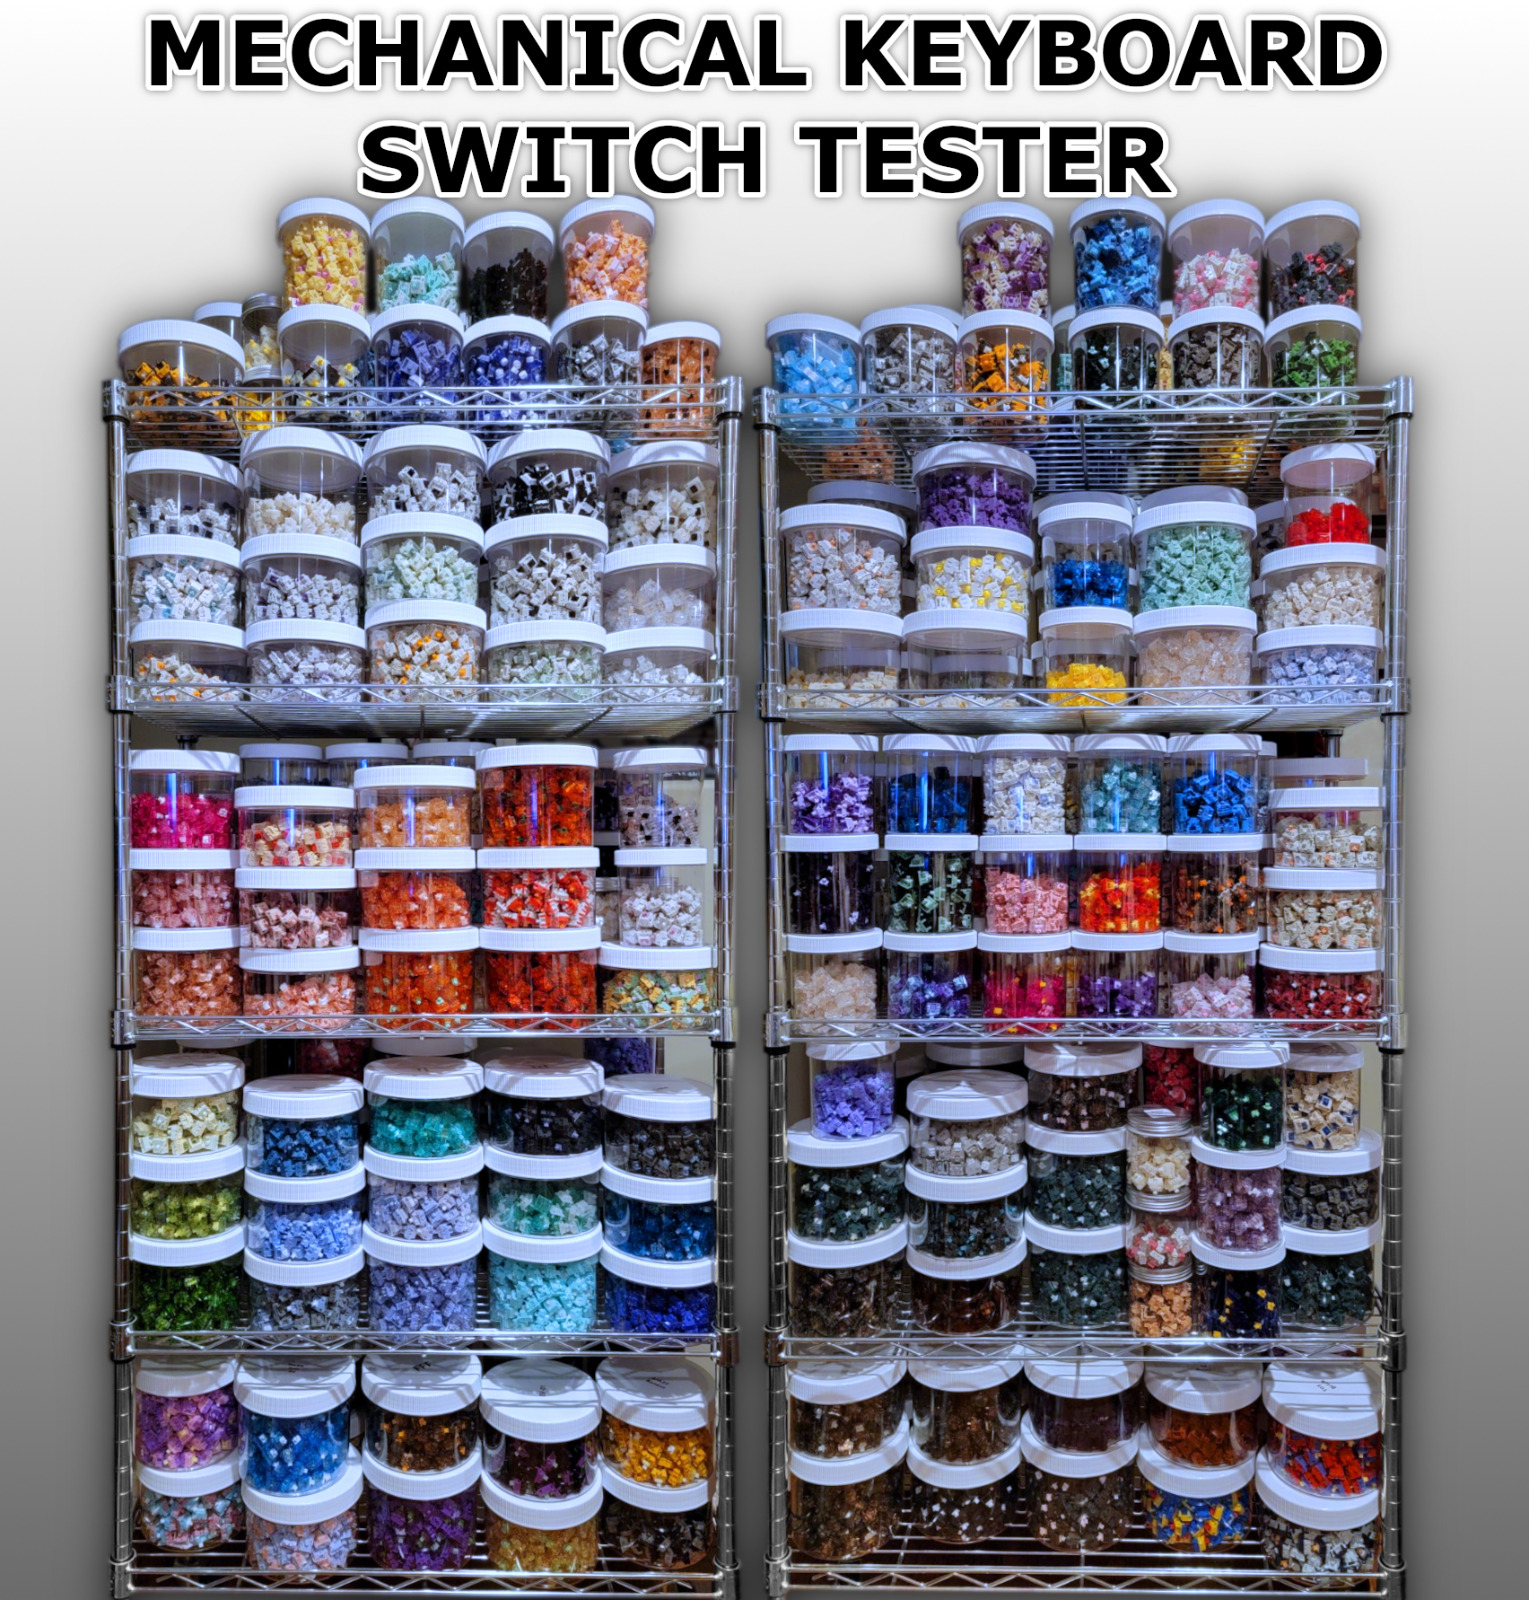 Mechanical Keyboard Switch Tester - 20 RANDOM ENTHUSIAST SWITCH SAMPLE PACK